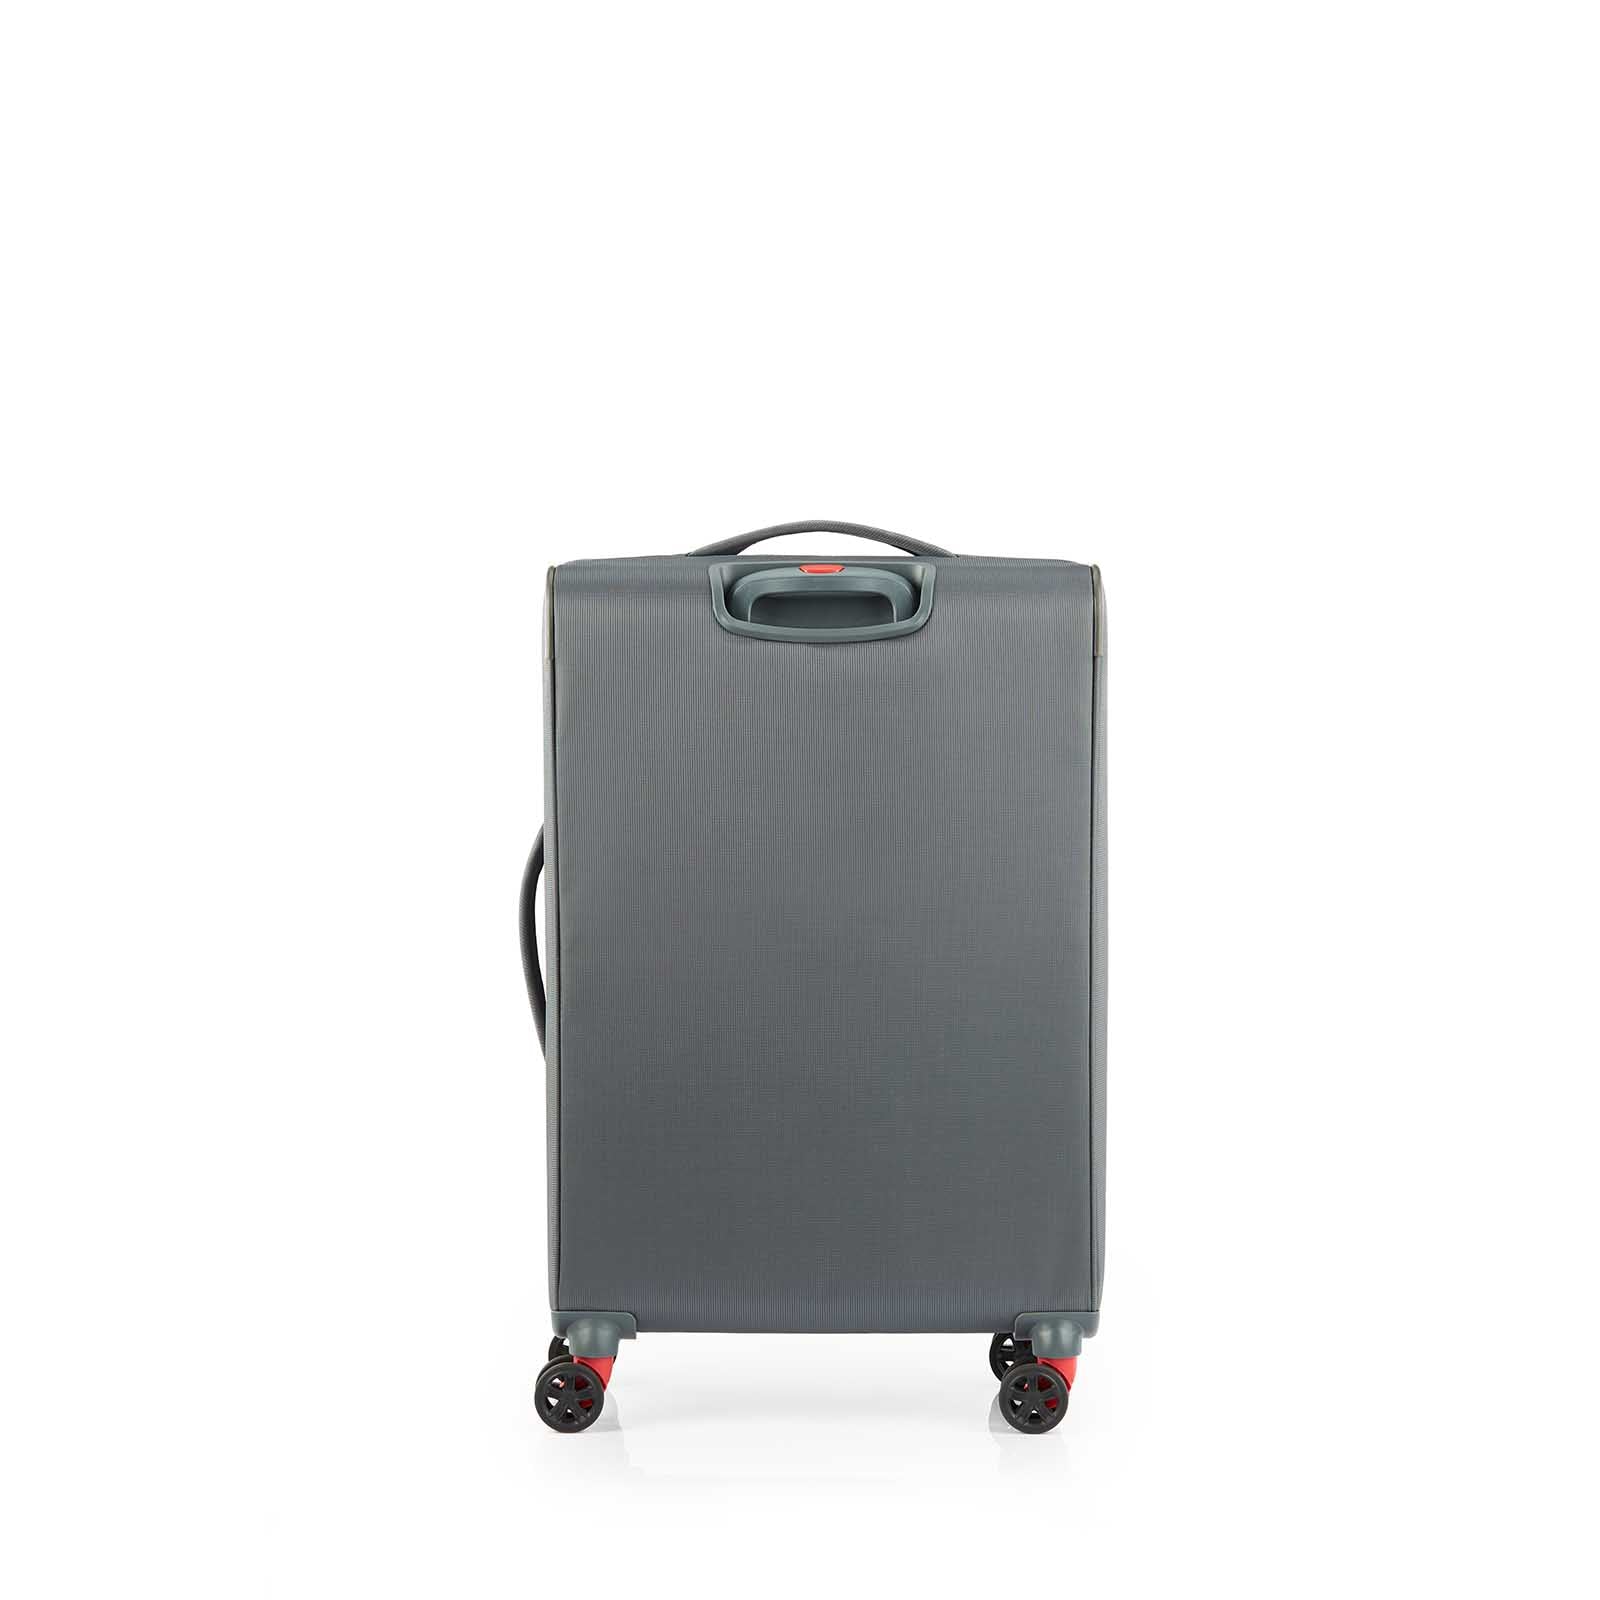 American-Tourister-Applite-4-Eco-71cm-Suitcase-Grey-Red-Back